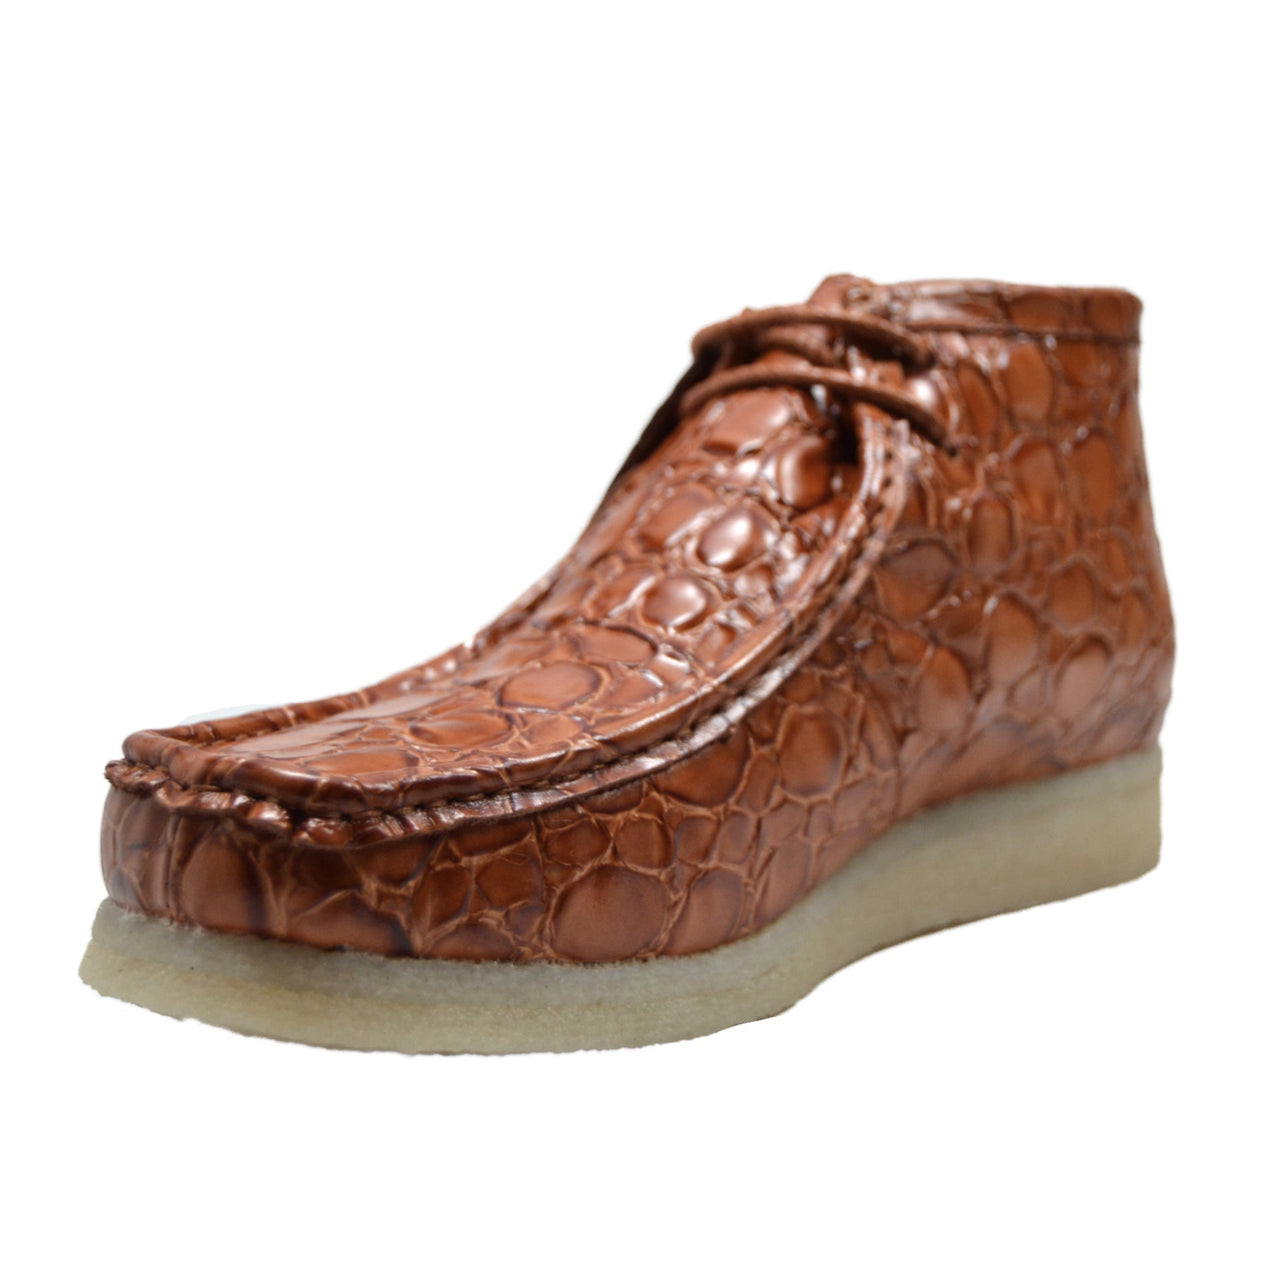 British Walkers Crocs Wallabee Boots Men's Limited Editon Crocodile Leather Ankle Boots